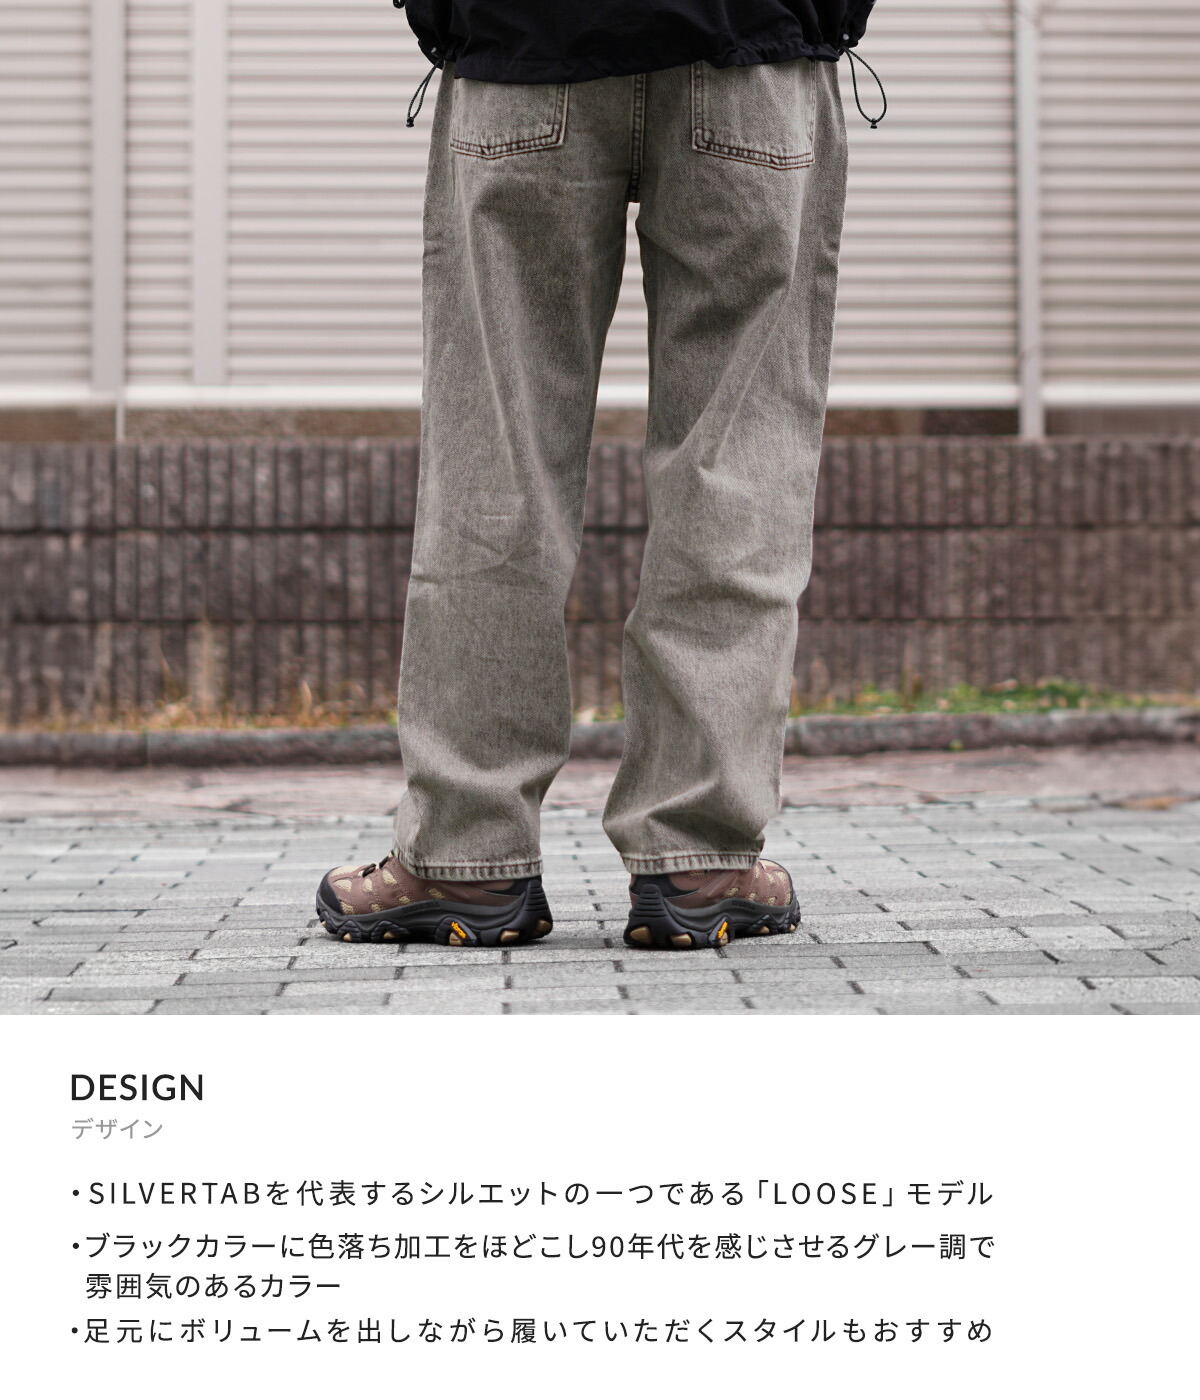 LEVI'S / リーバイス ： NEW SILVERTAB LOOSE HOW I GREY ： A7488 